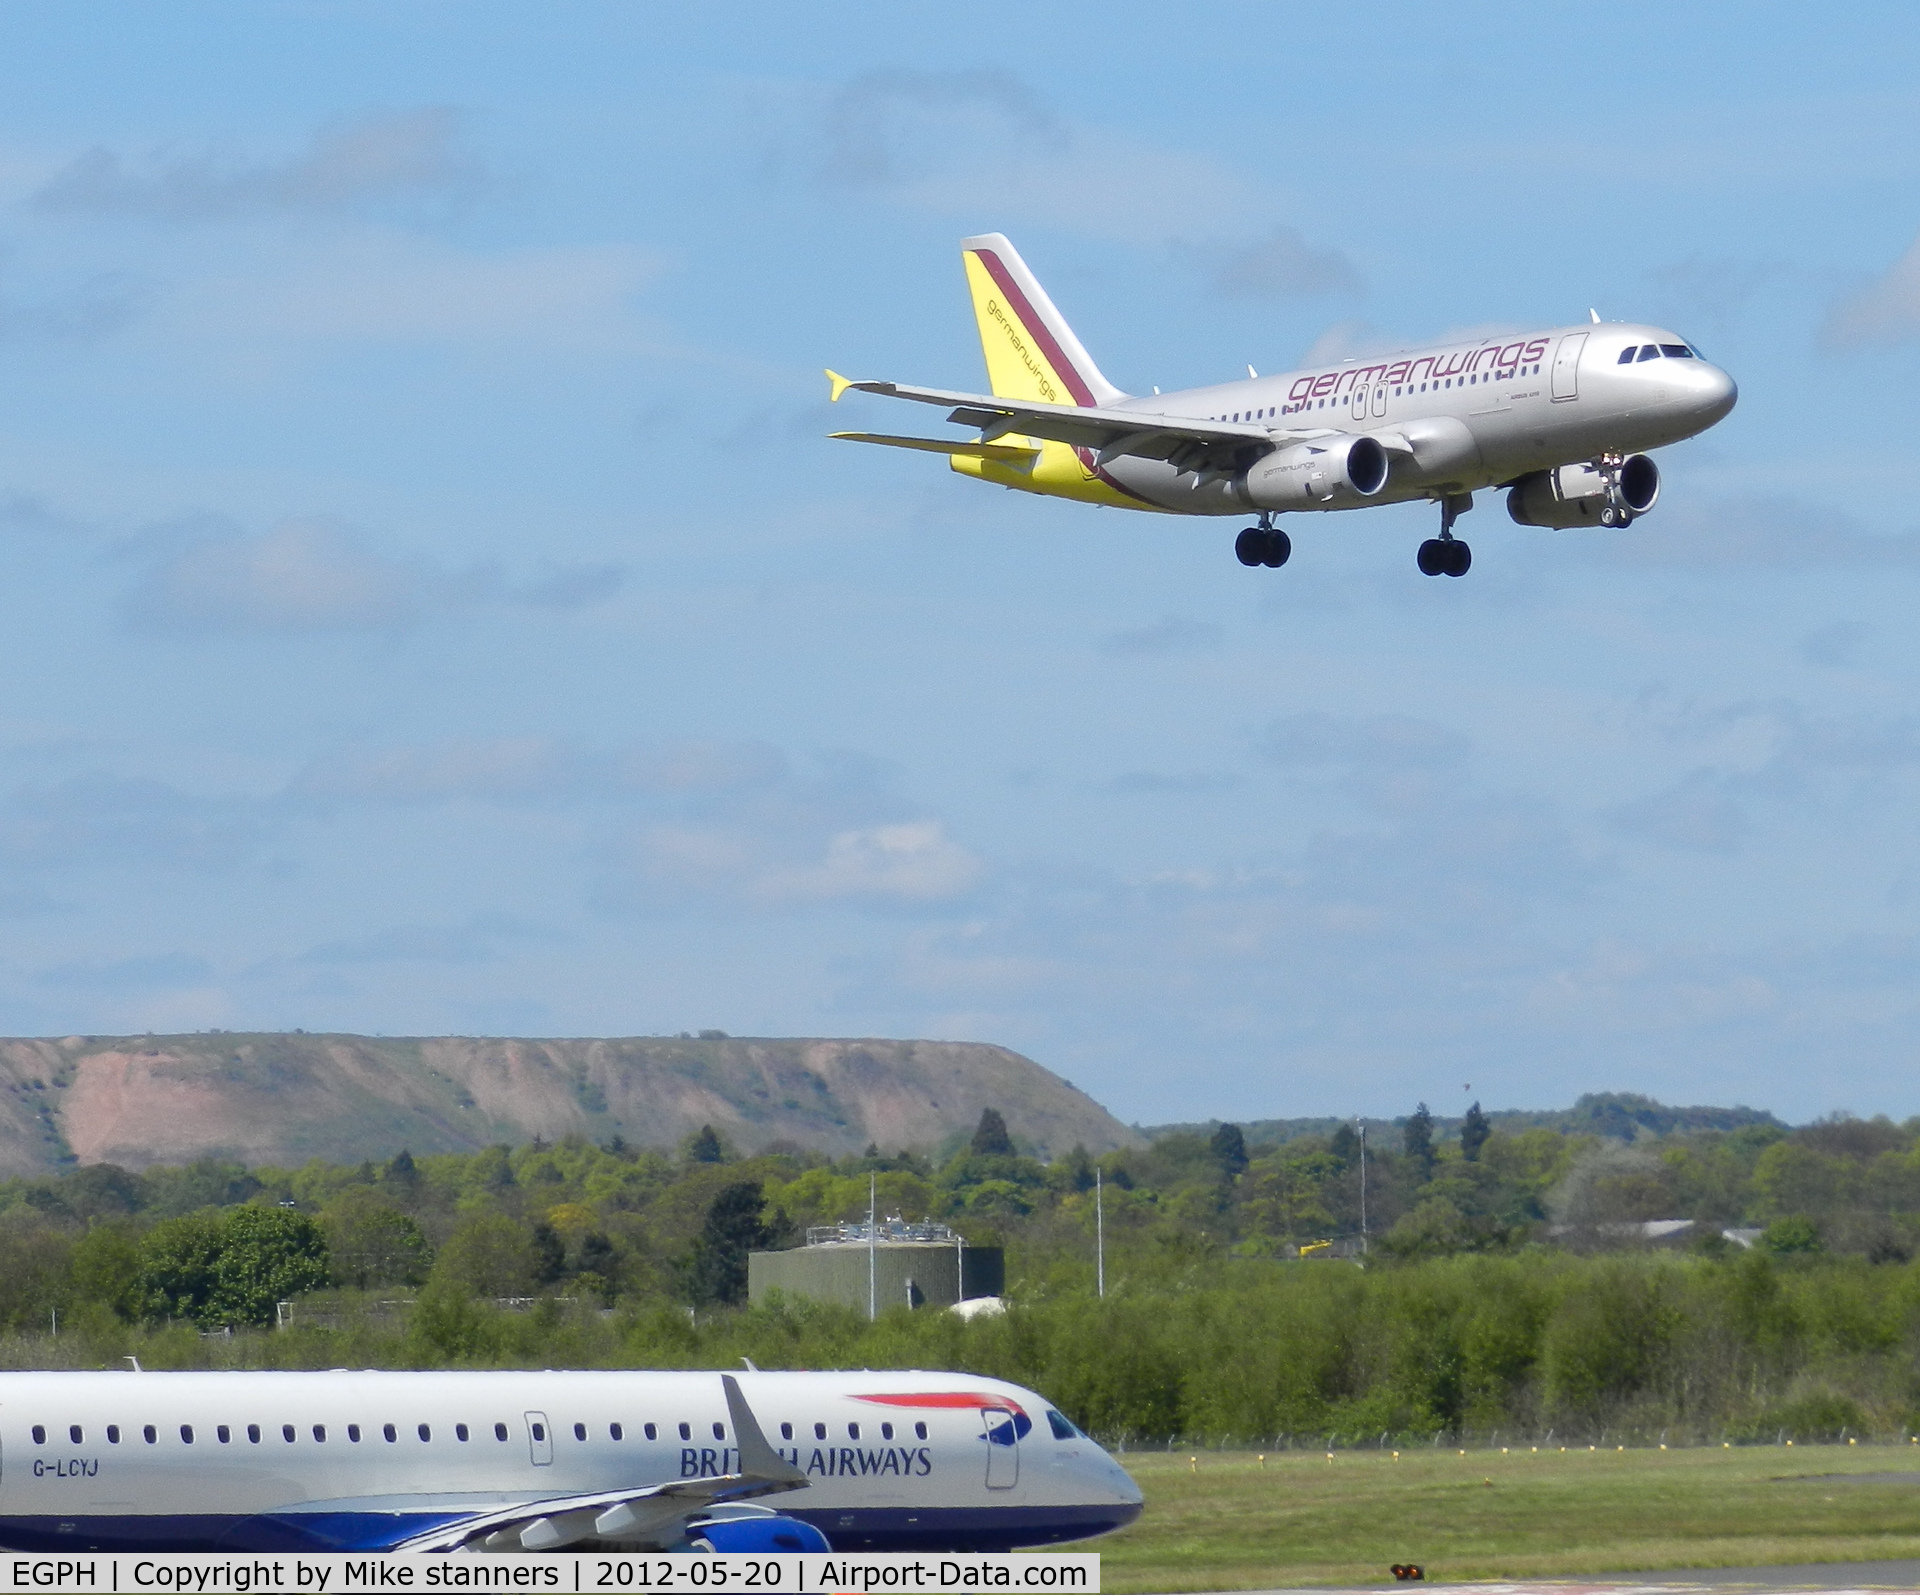 Edinburgh Airport, Edinburgh, Scotland United Kingdom (EGPH) - Germanwings A319-132 D-AGWM comes in to Land from CGN While EMB190-100SR G-LCYJ Waits to enter runway 06 for departure to LCY